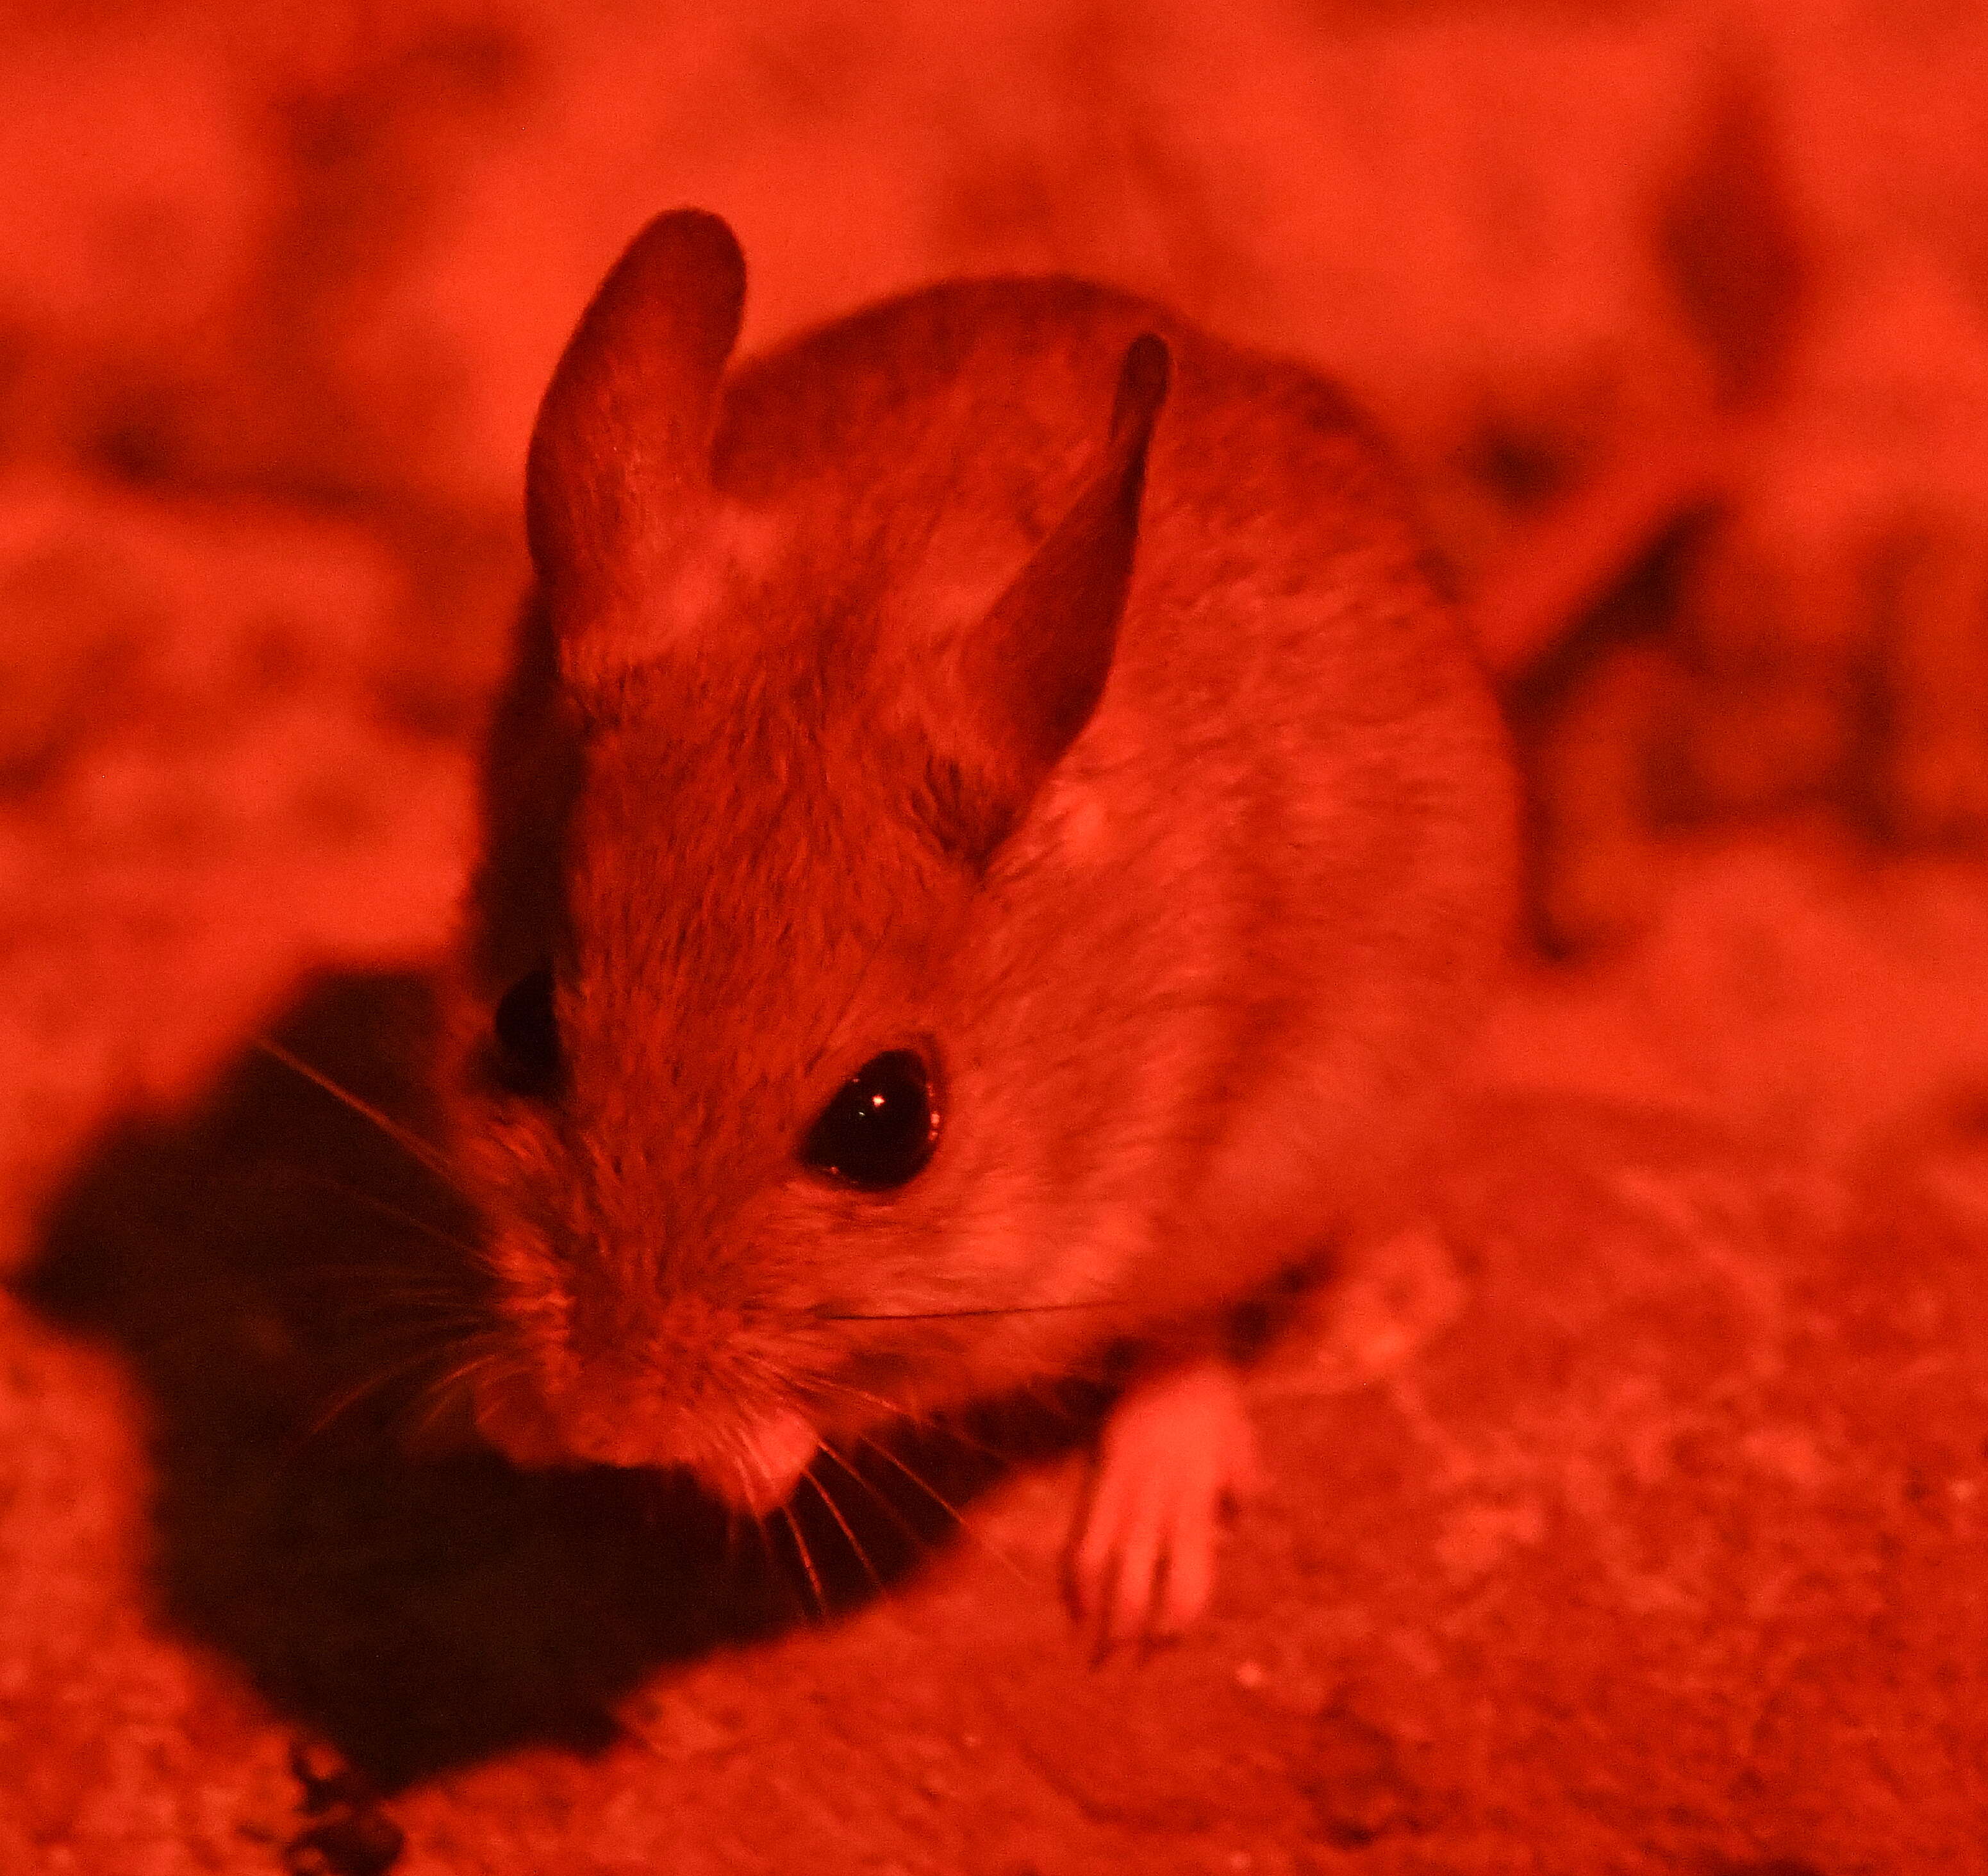 Image of Spinefex Hopping Mouse